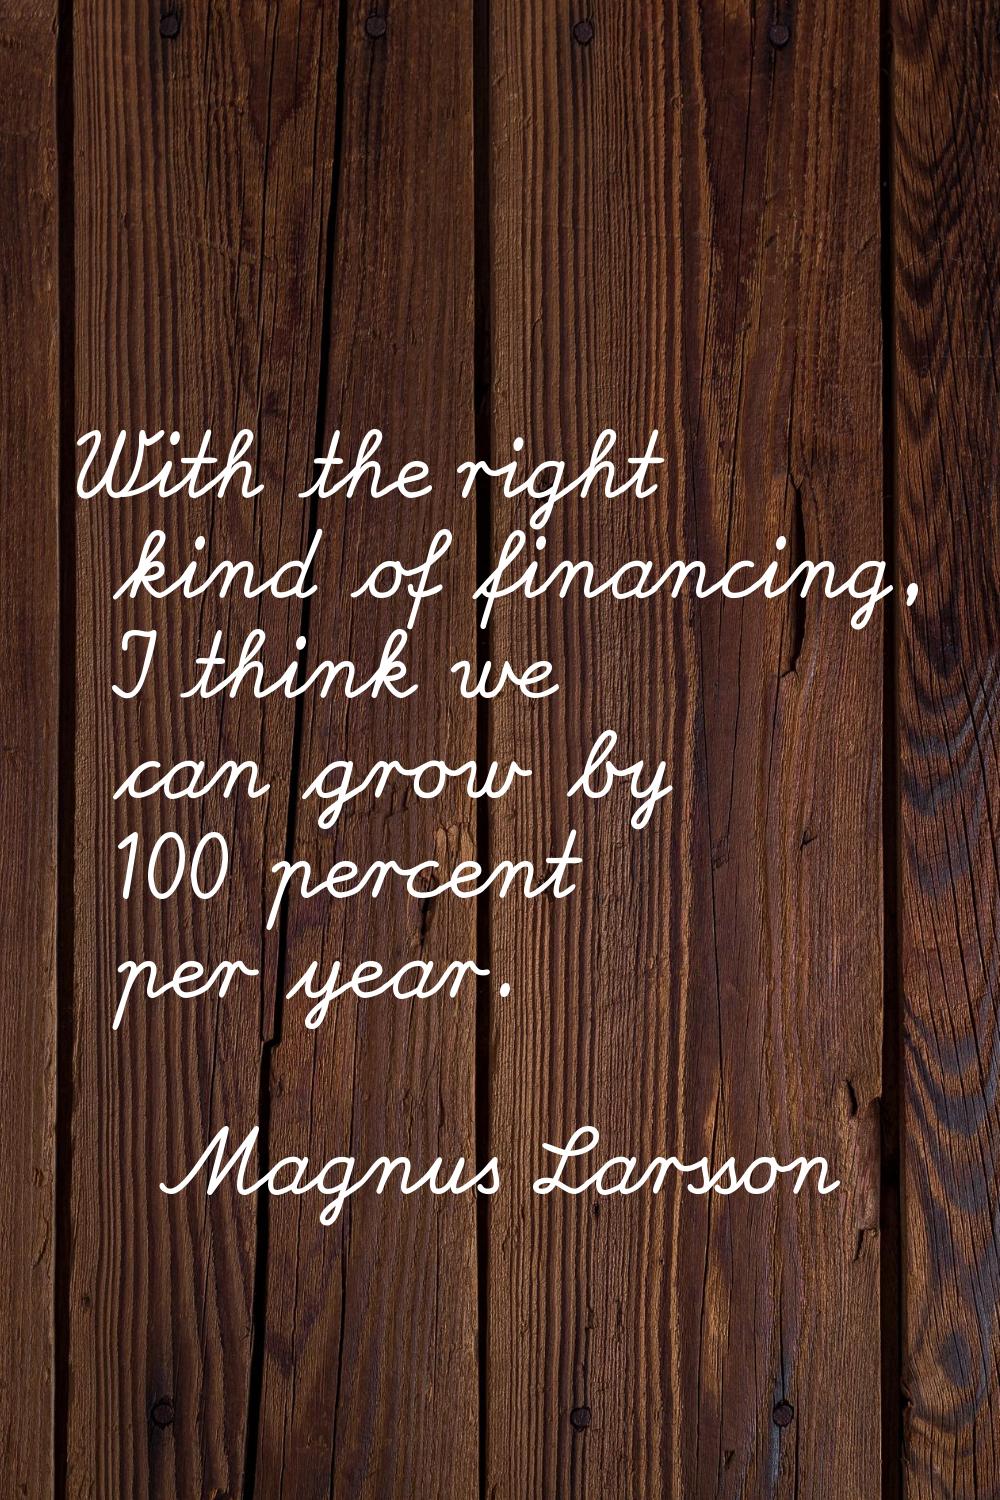 With the right kind of financing, I think we can grow by 100 percent per year.